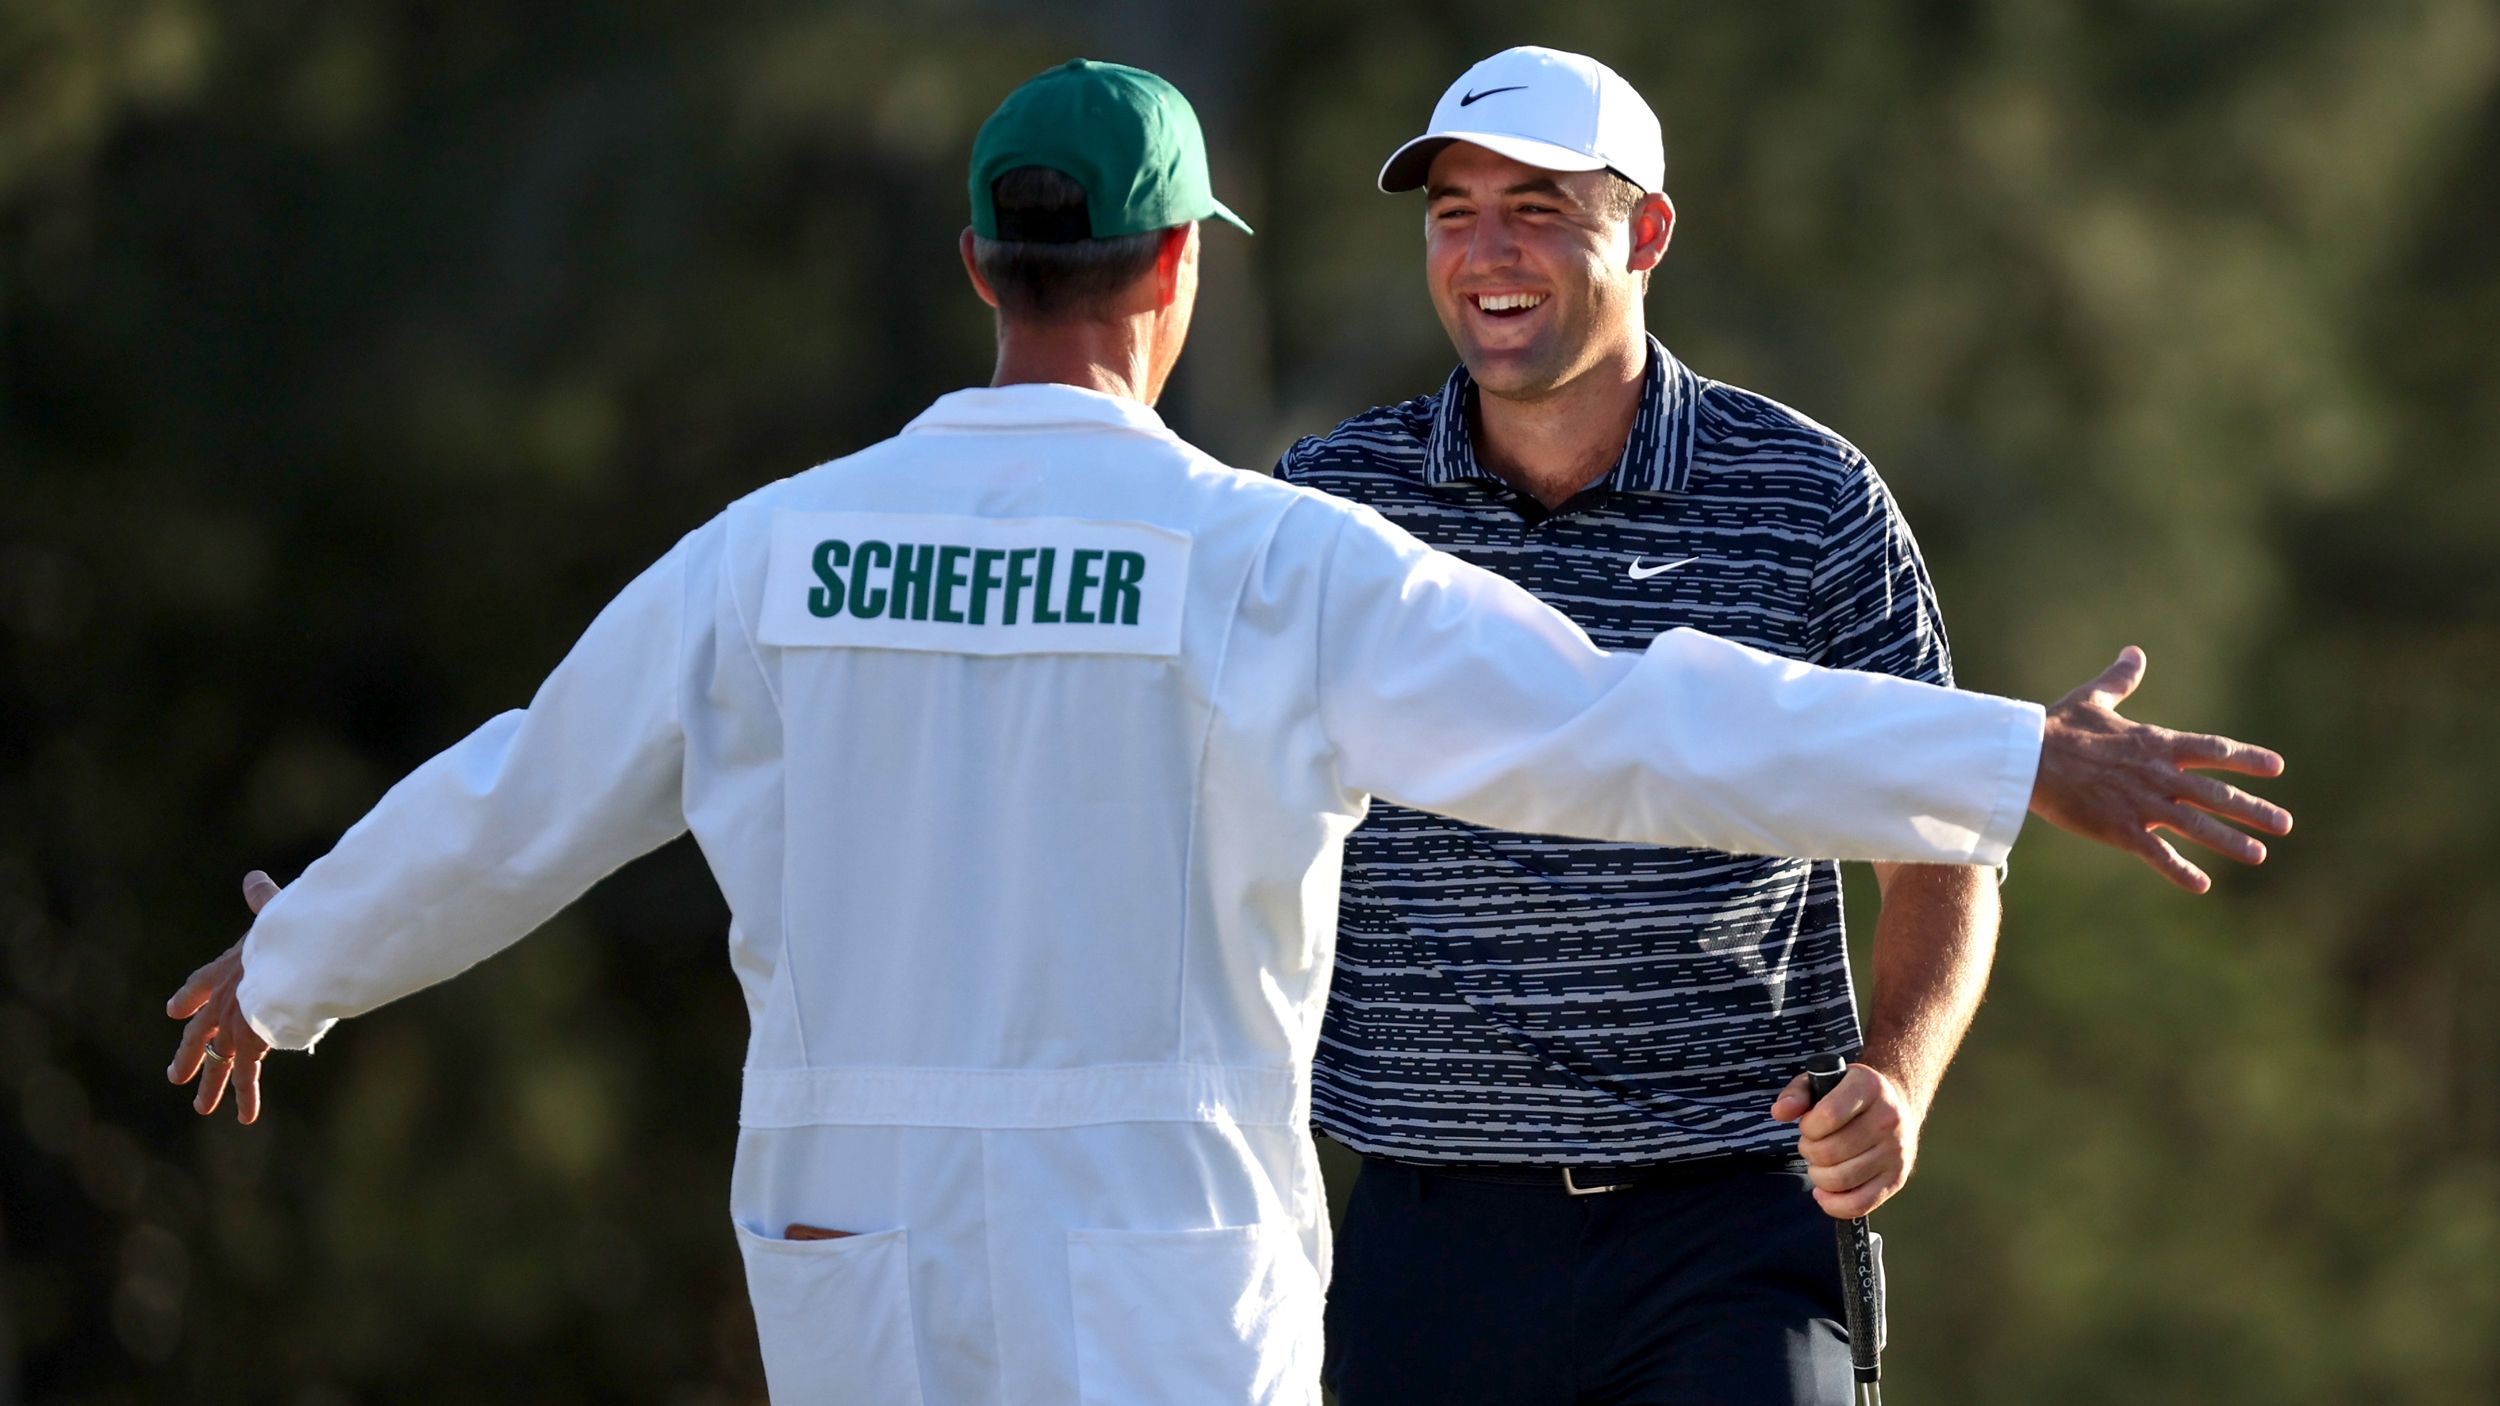 Why Do Caddies Wear White Jumpsuits At The Masters?